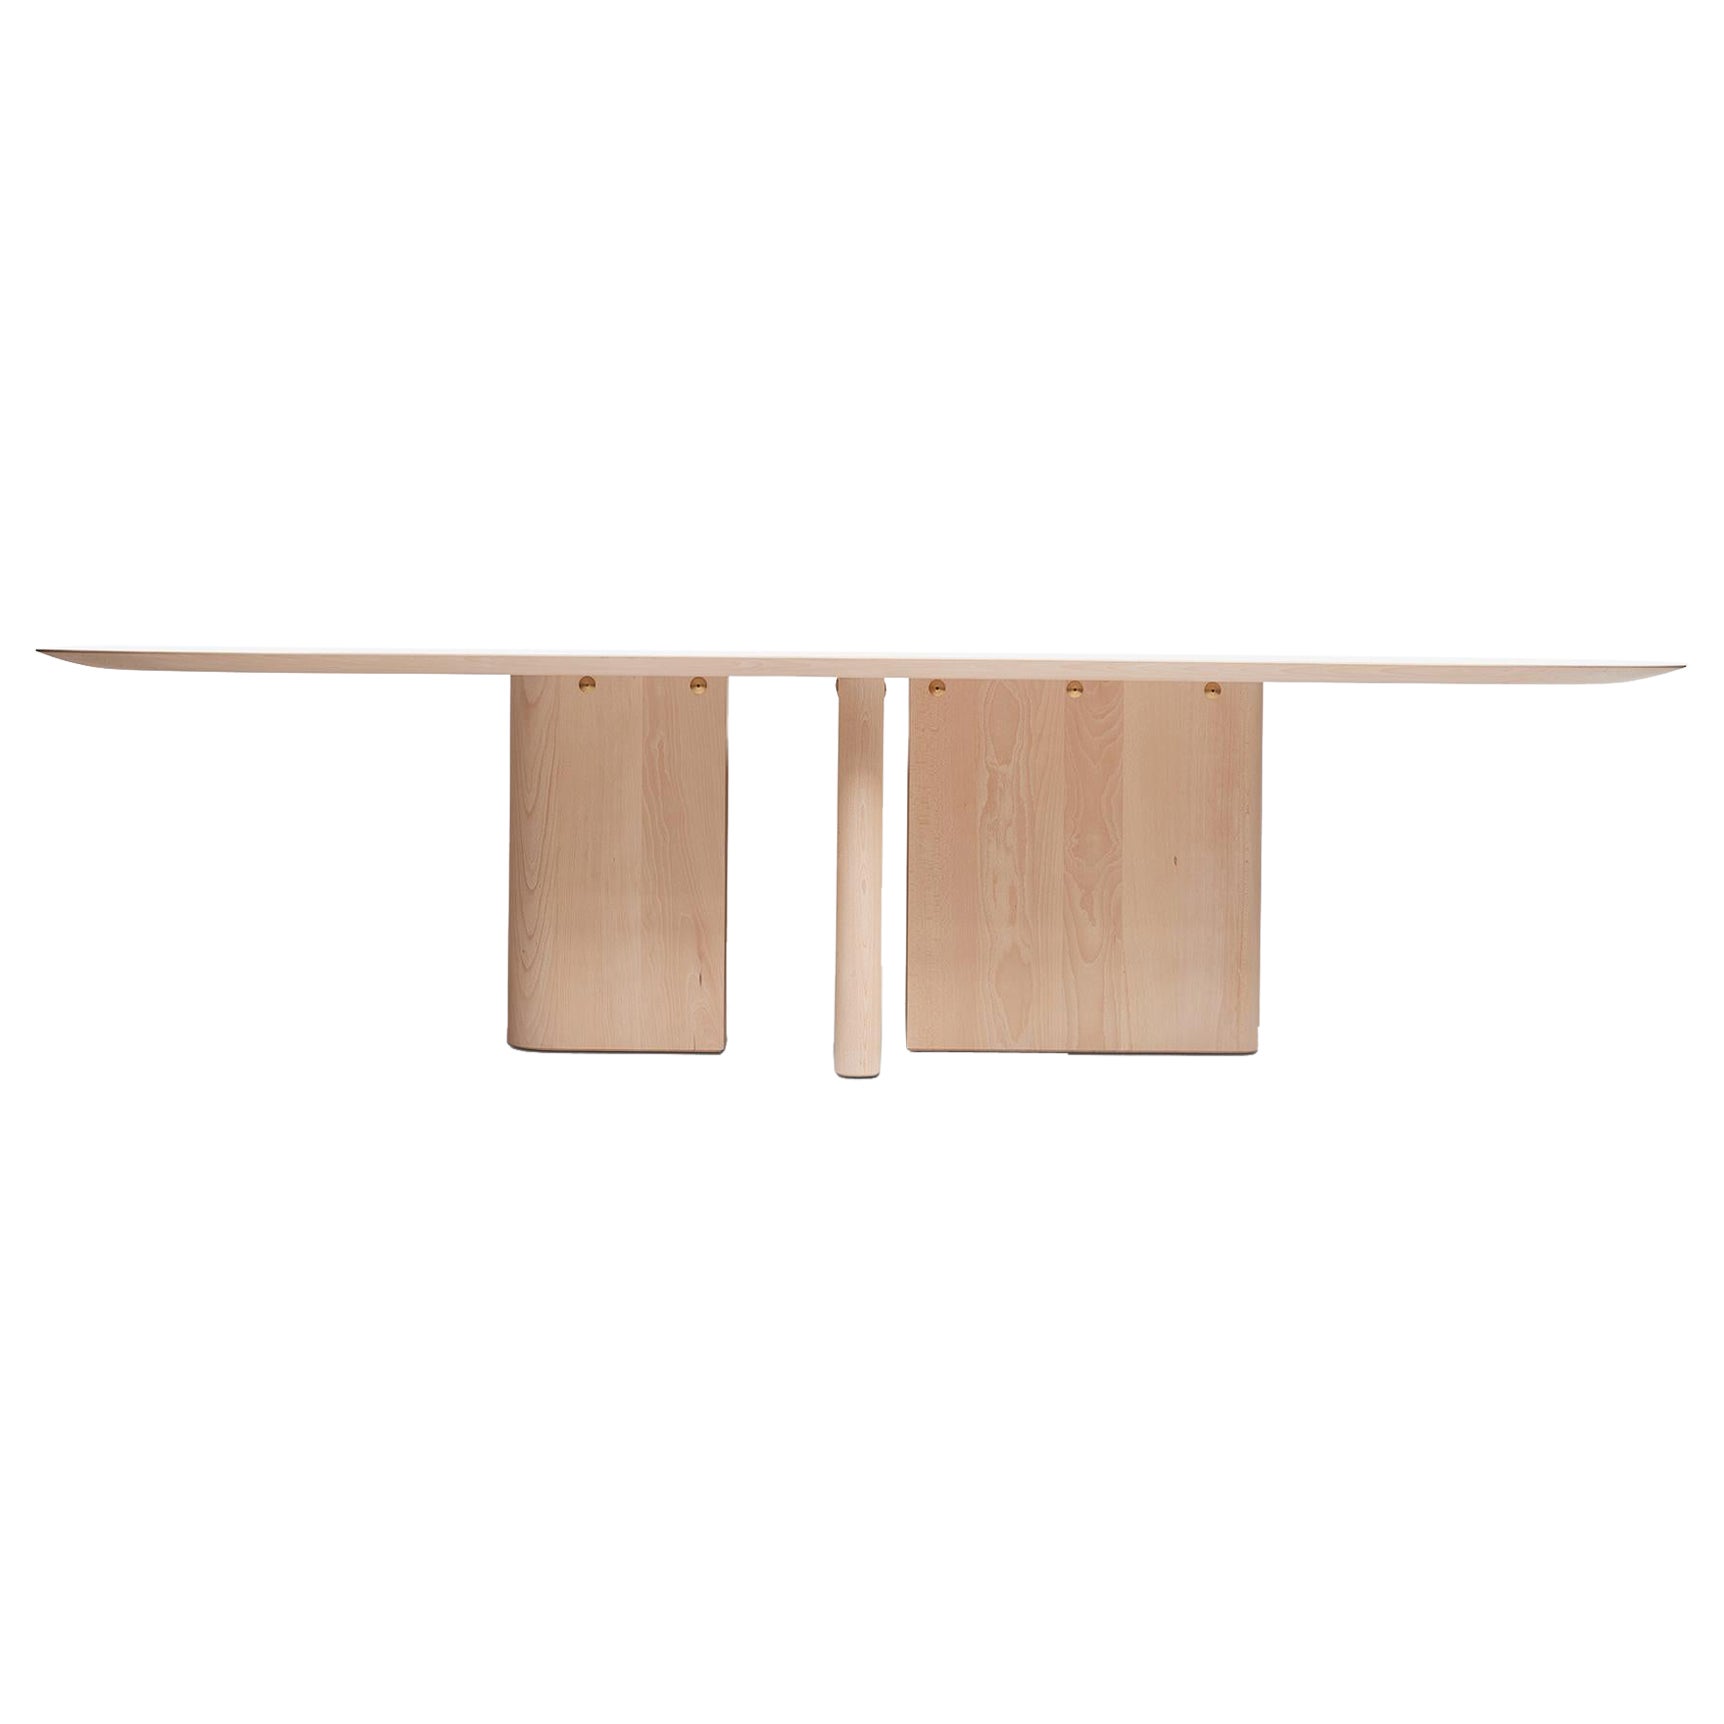 MG210 Dining Table in Danish beech by Malte Gormsen design by Norm Architects